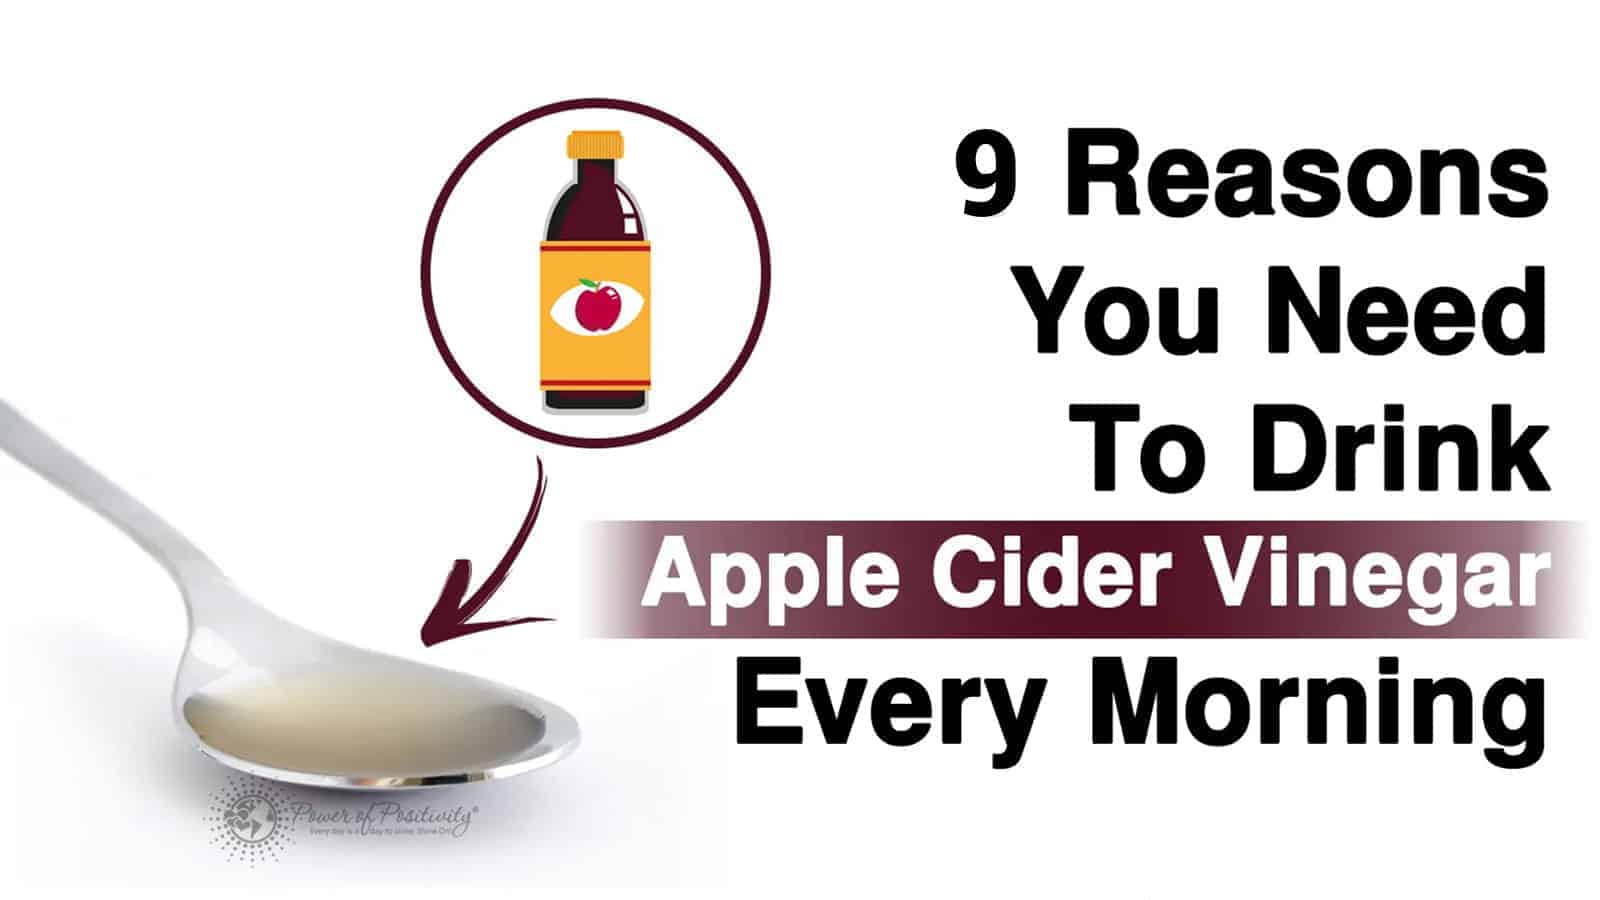 Why You Need To Drink Apple Cider Vinegar Every Morning, According to Science